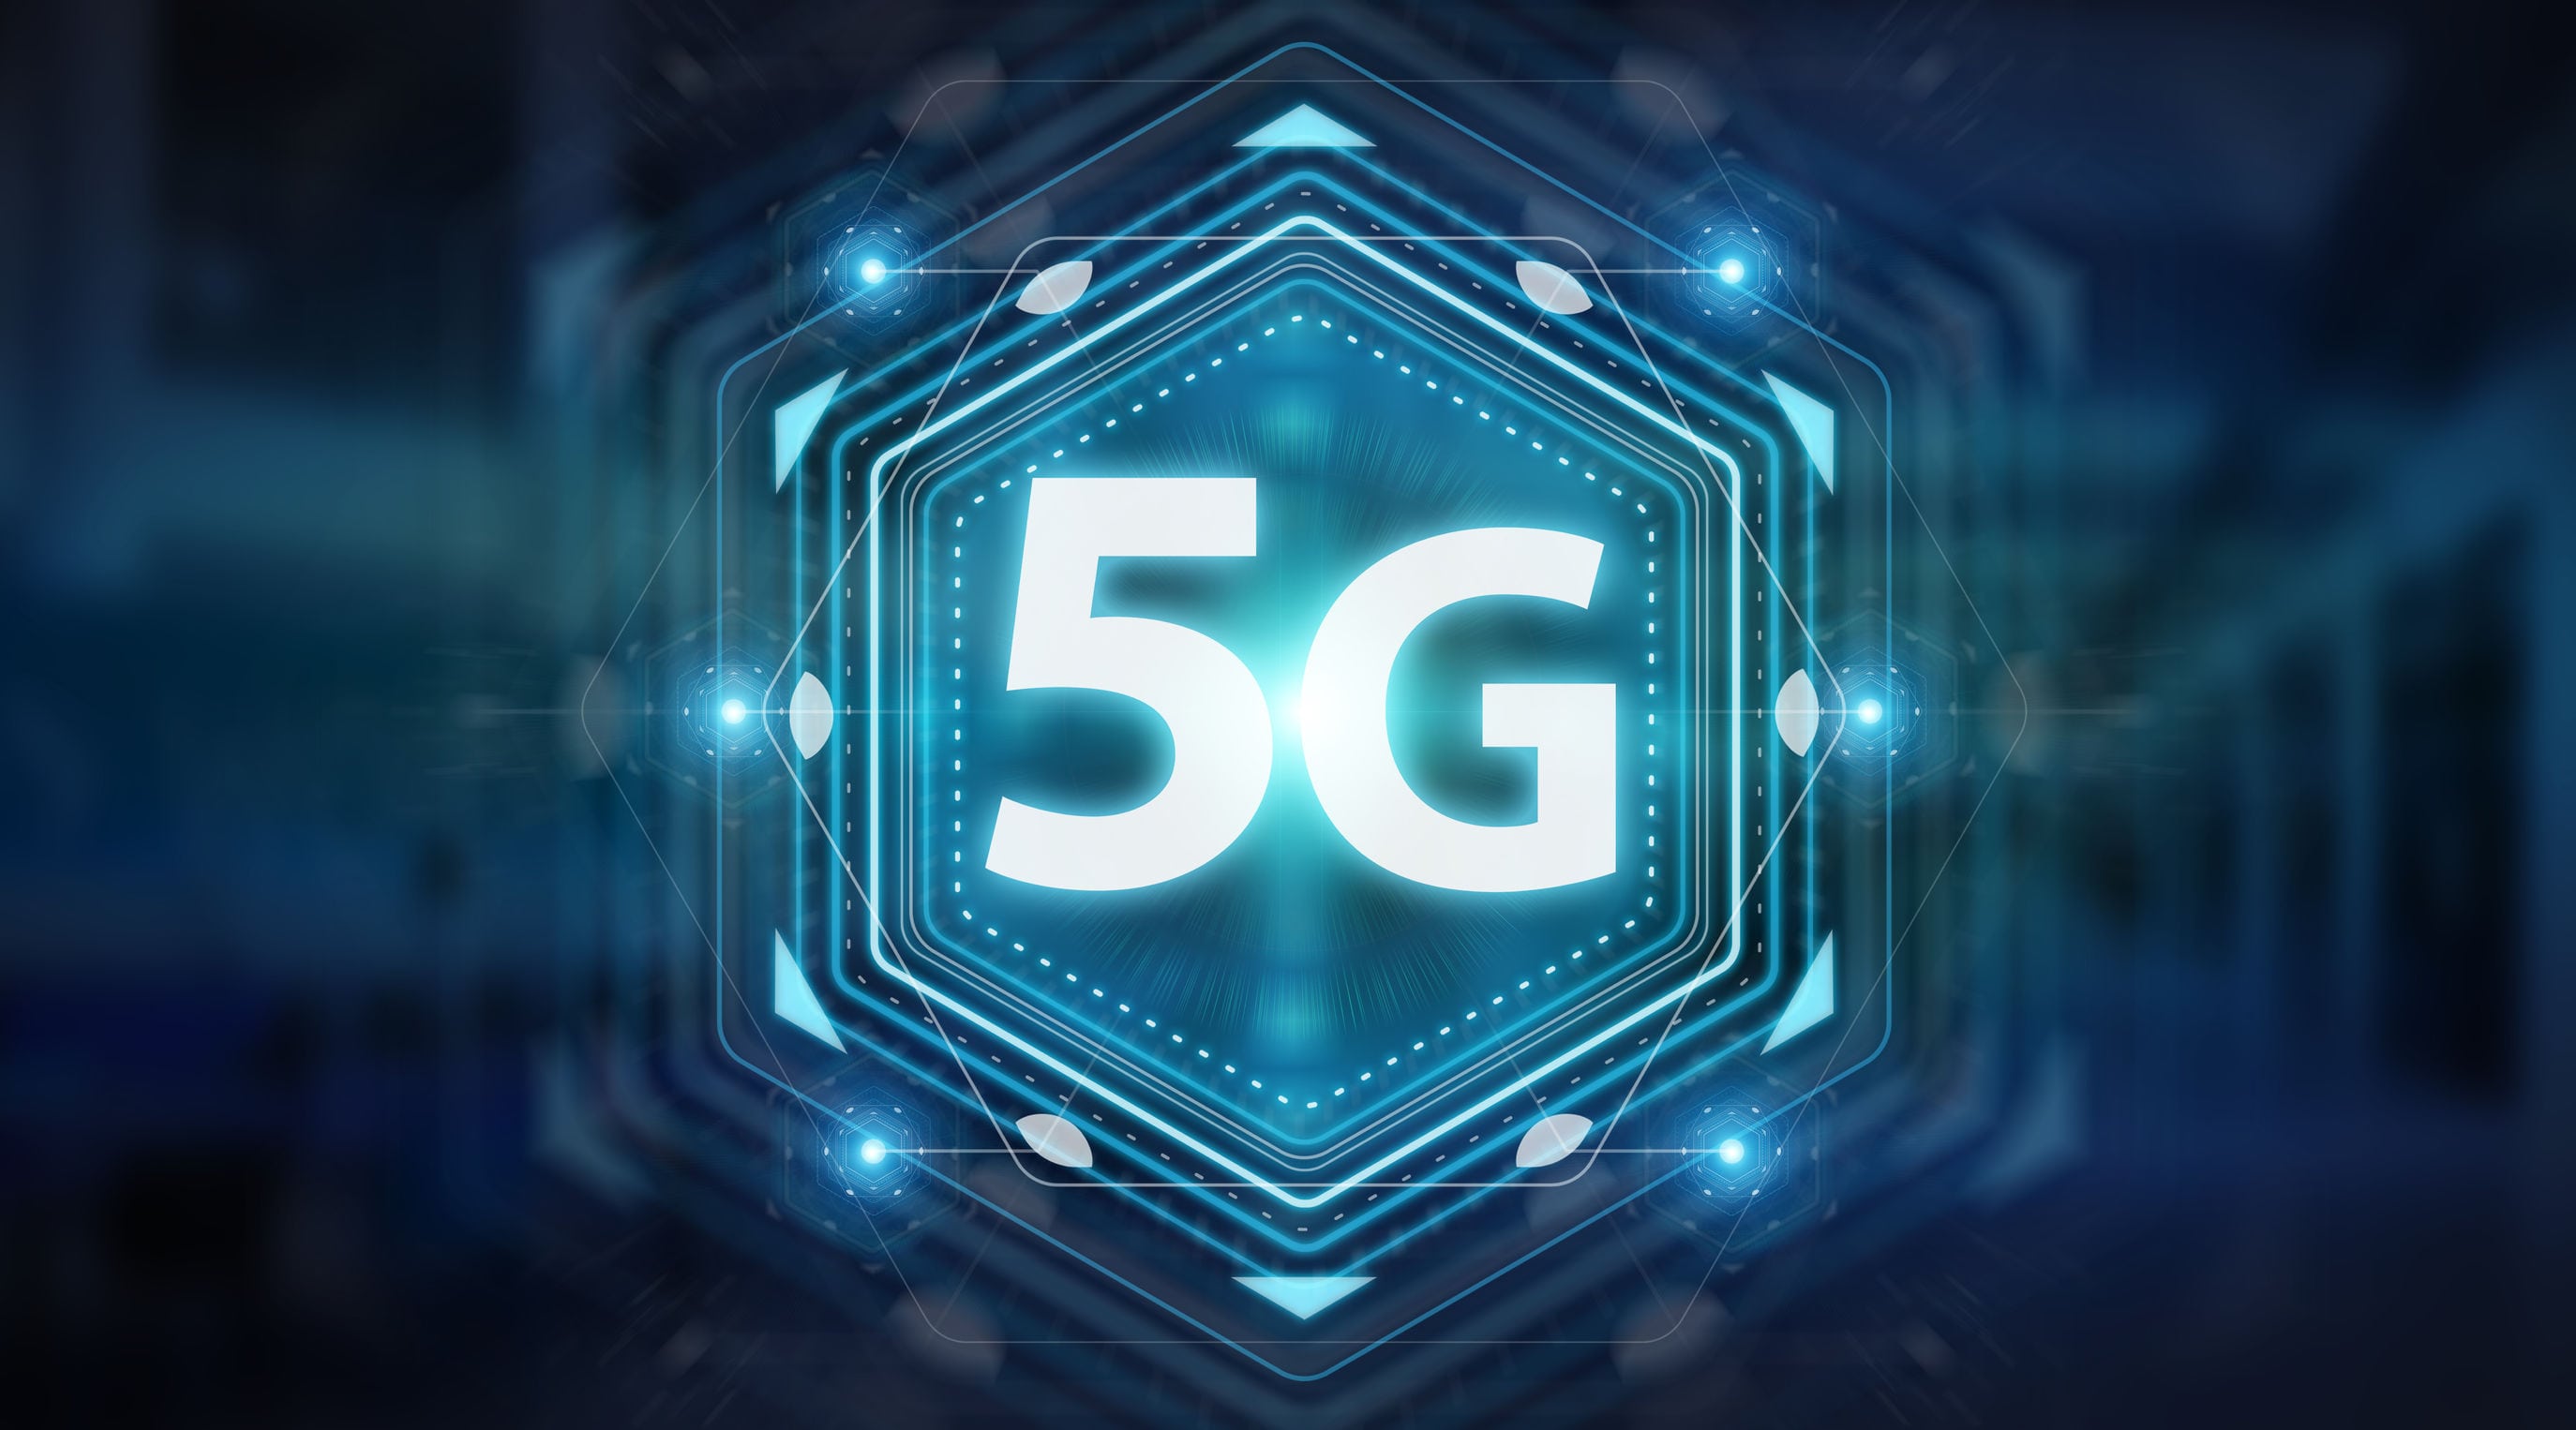 Huawei to develop 5G variant of the upcoming Nova 6